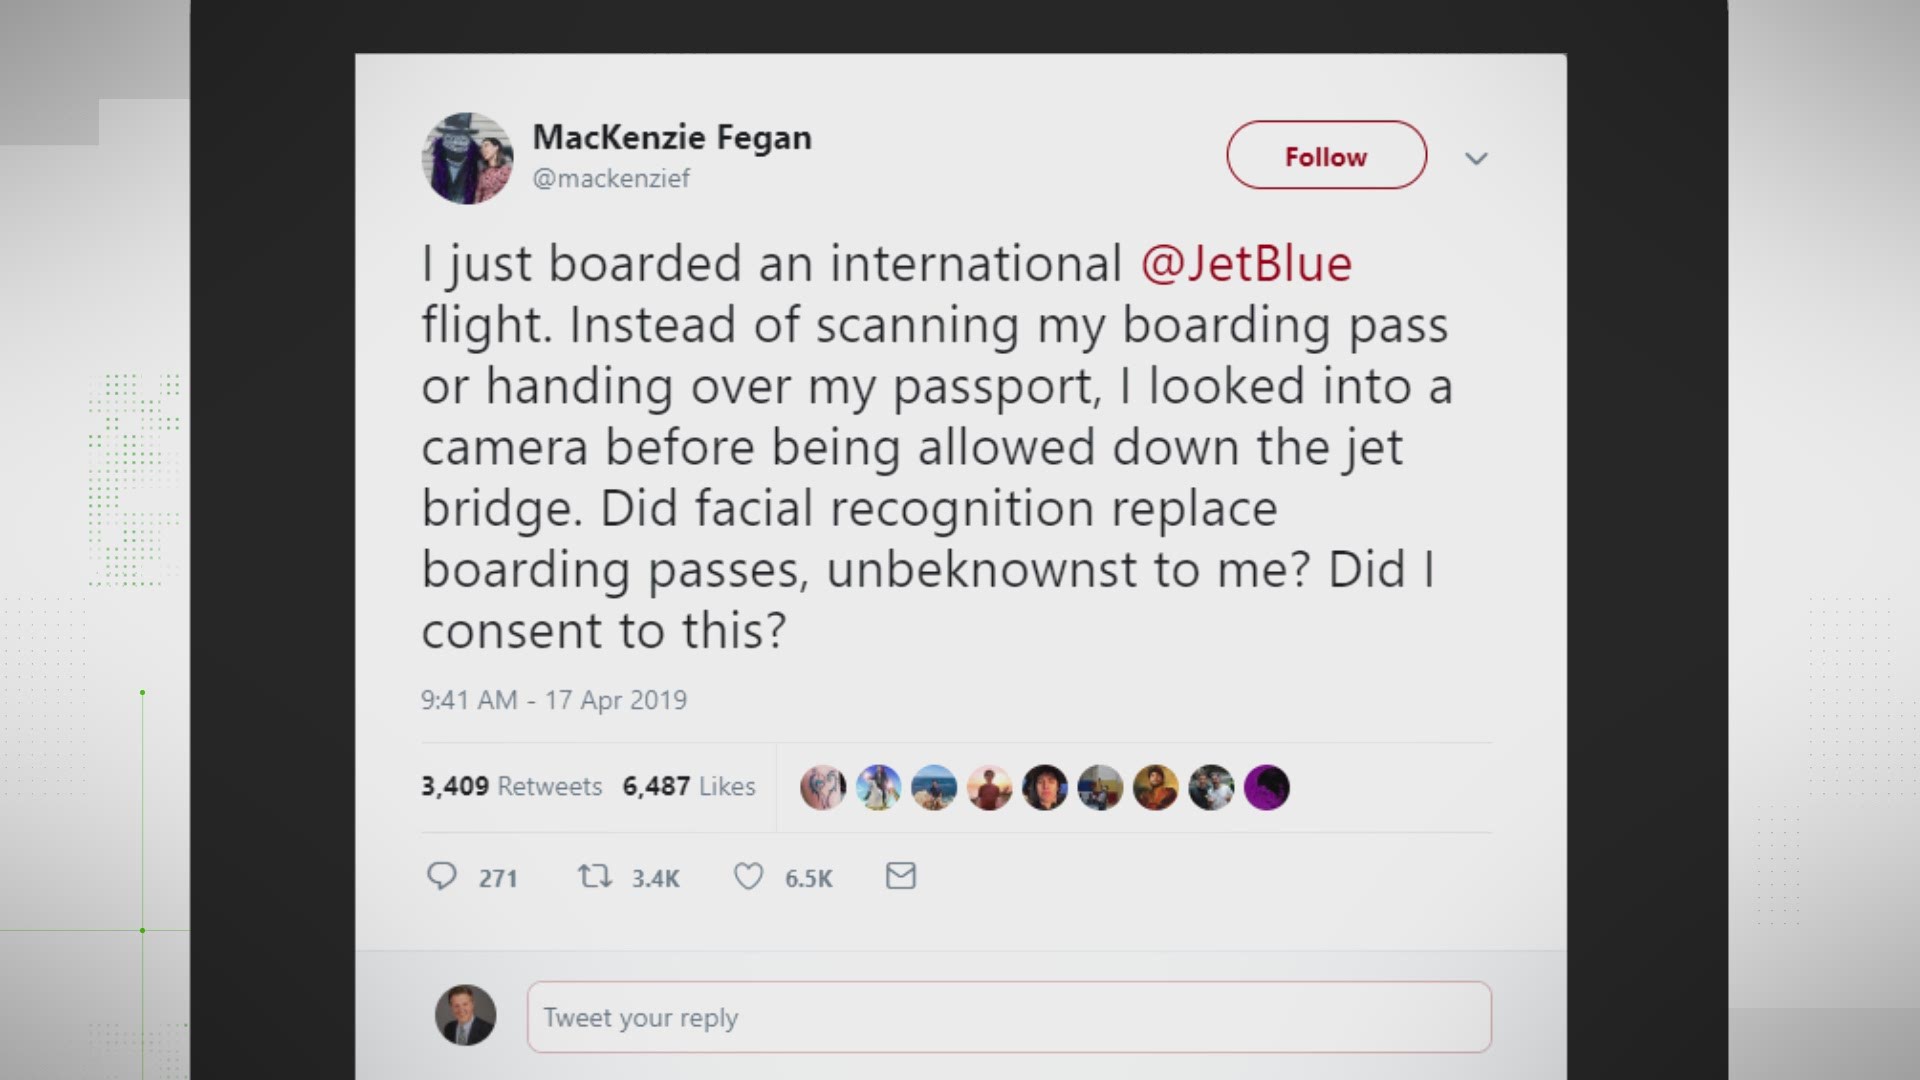 In a twitter thread, a woman said JetBlue didn't ask for her passport at the gate, they took her picture. Was that facial recognition? And where'd they get her photo in the first place?